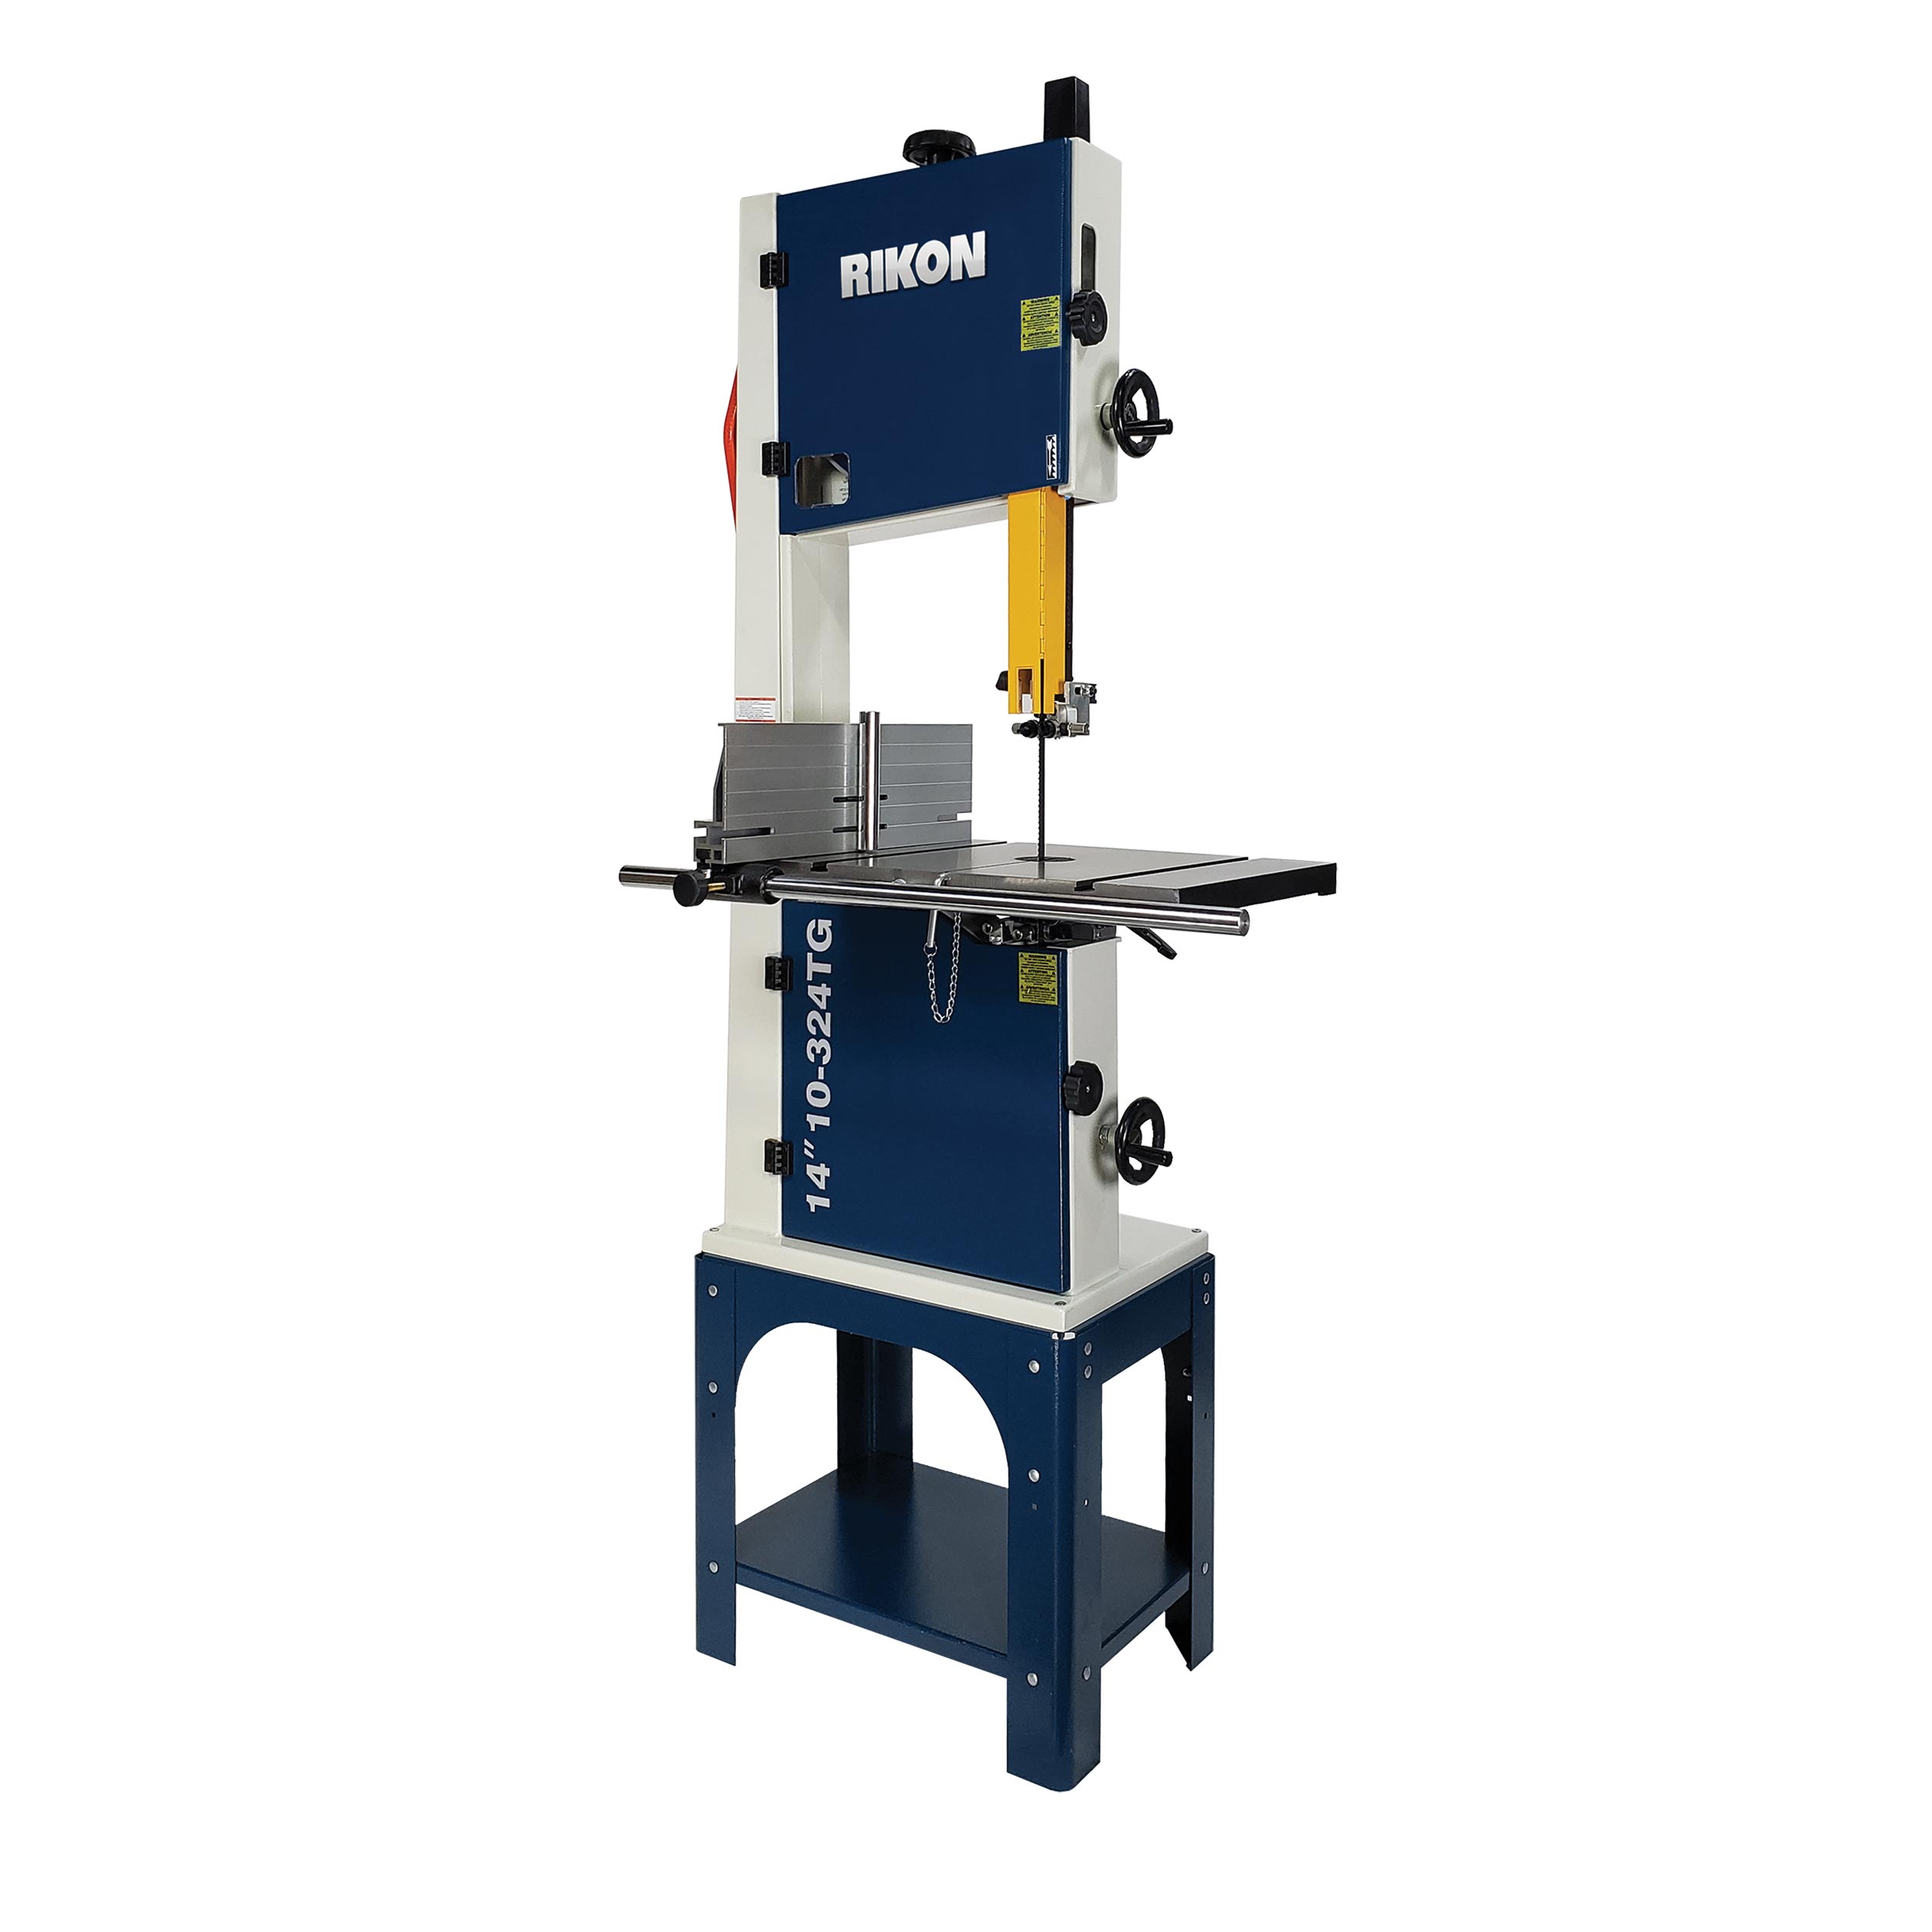 14" Open Stand Bandsaw